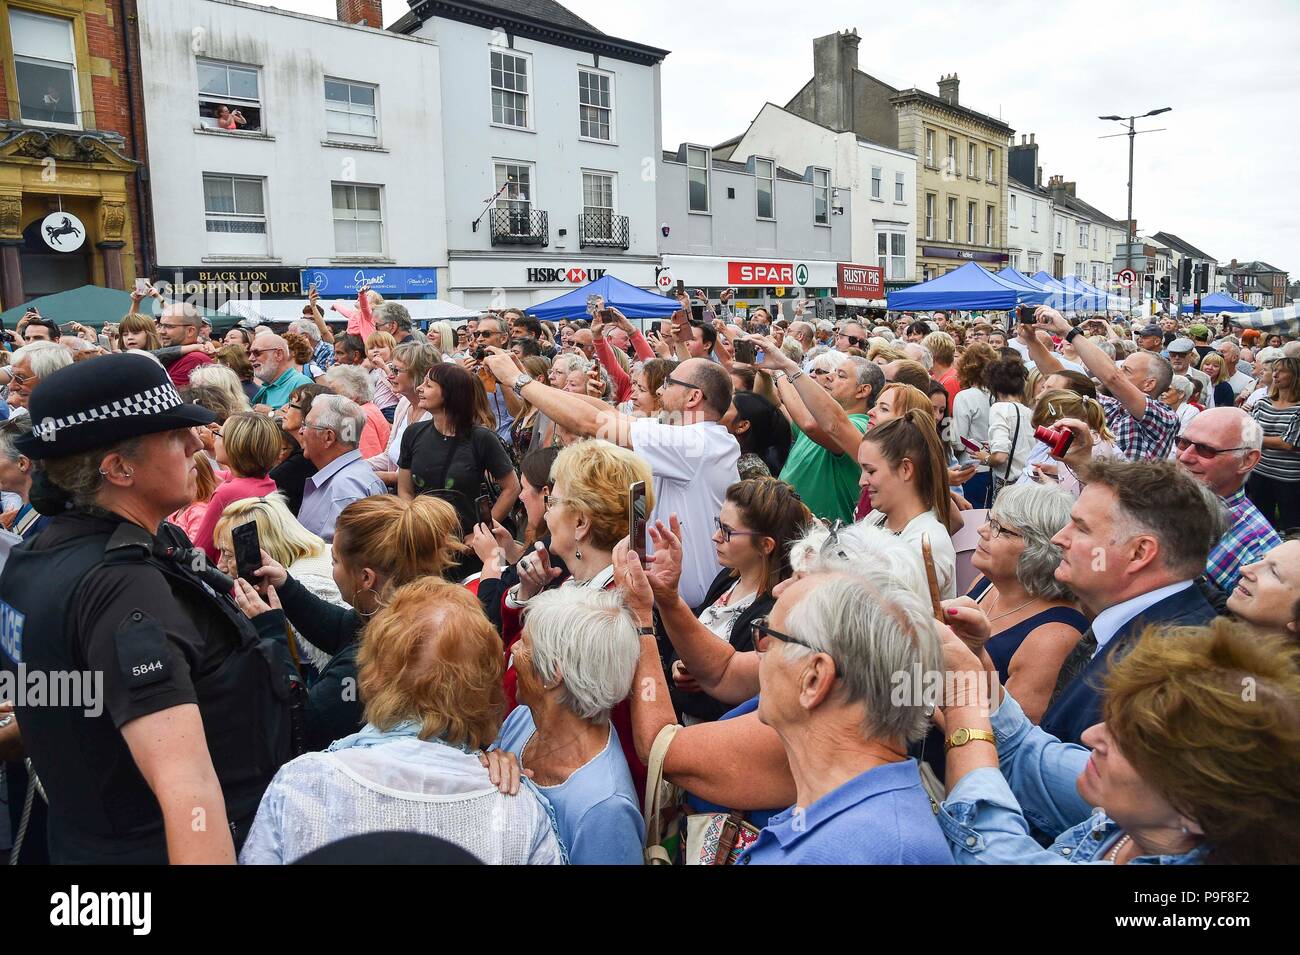 Honiton, Devon, UK.  18th July 2018.   The Duke and Duchess of Cornwall visit the Gate to Plate food market at Honiton in Devon.  Huge crowds turn out to see the royal couple.  Picture Credit: Graham Hunt/Alamy Live News Stock Photo